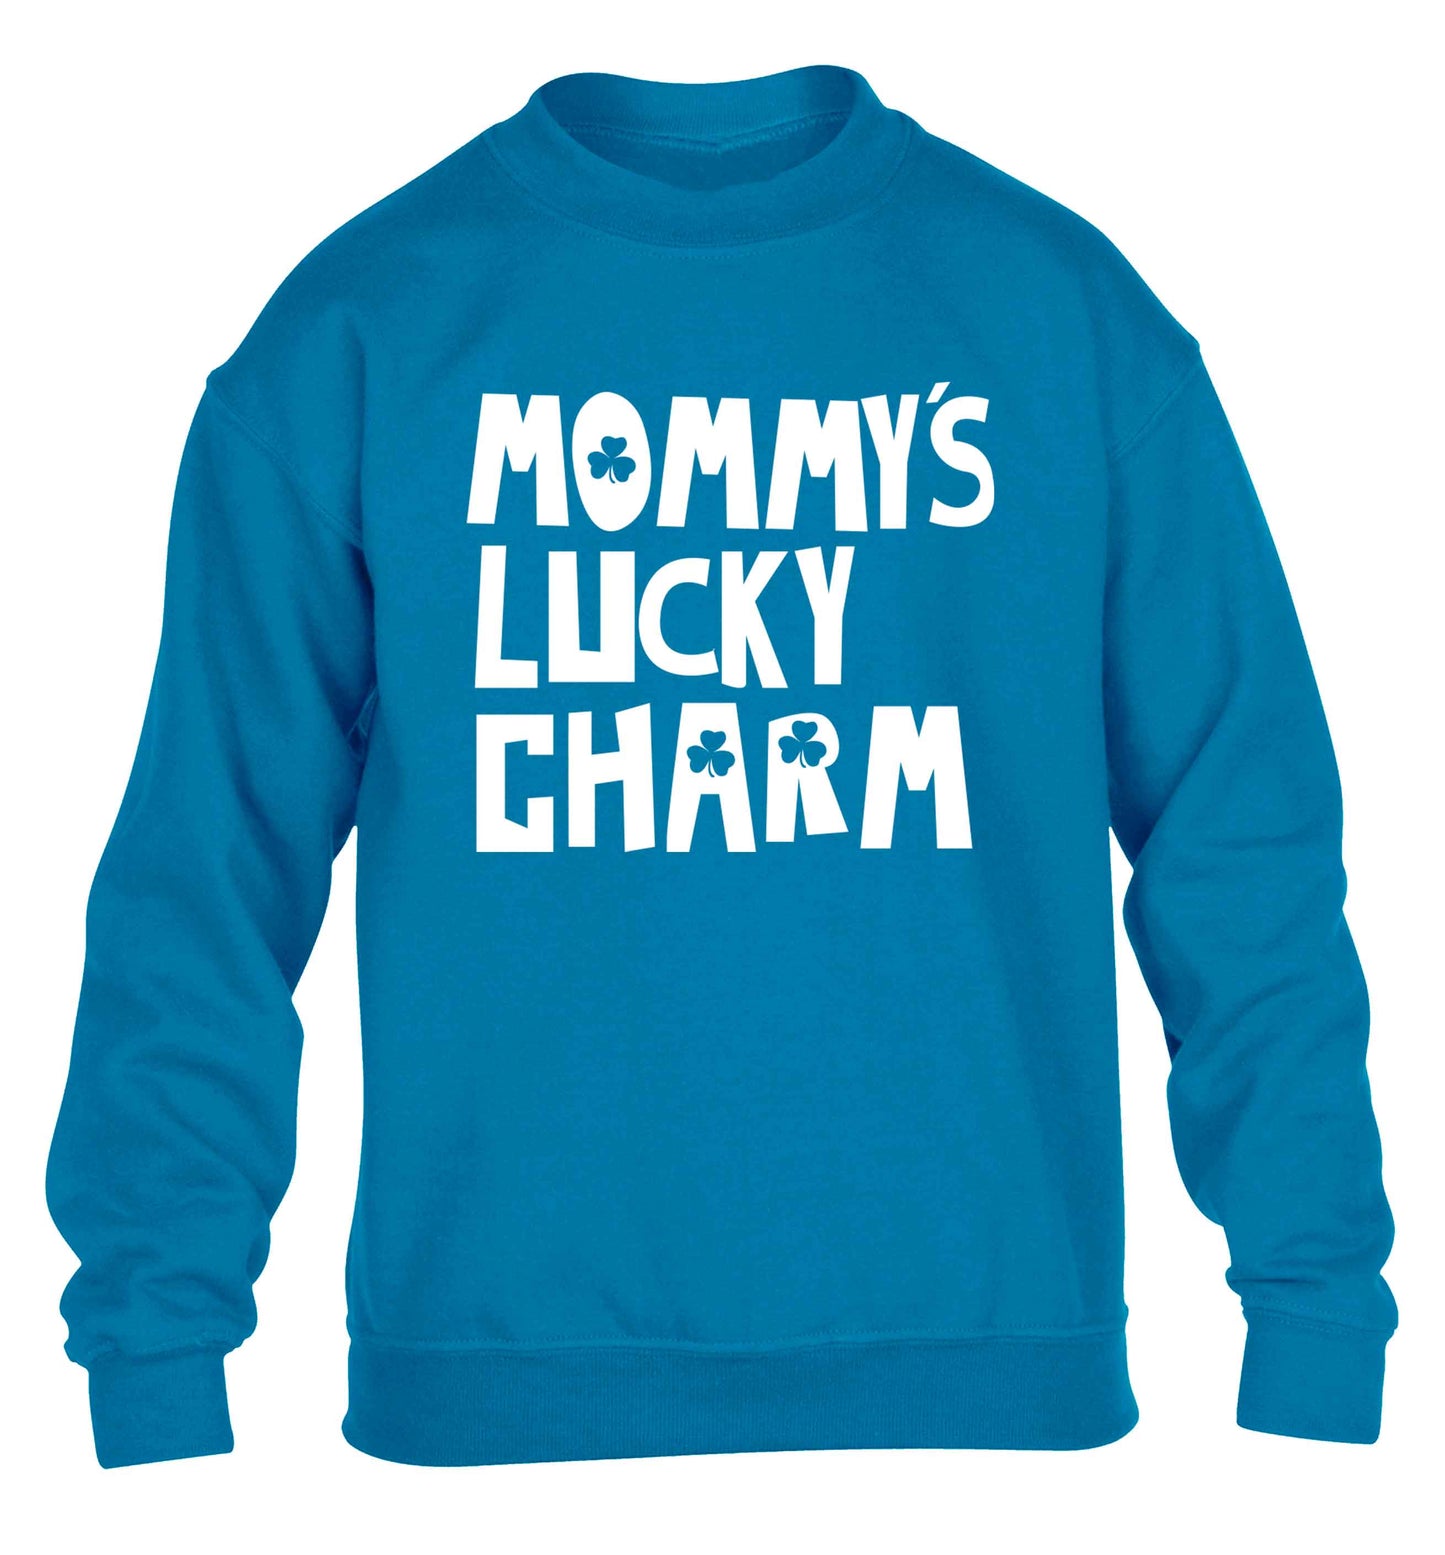 Mommy's lucky charm children's blue sweater 12-13 Years